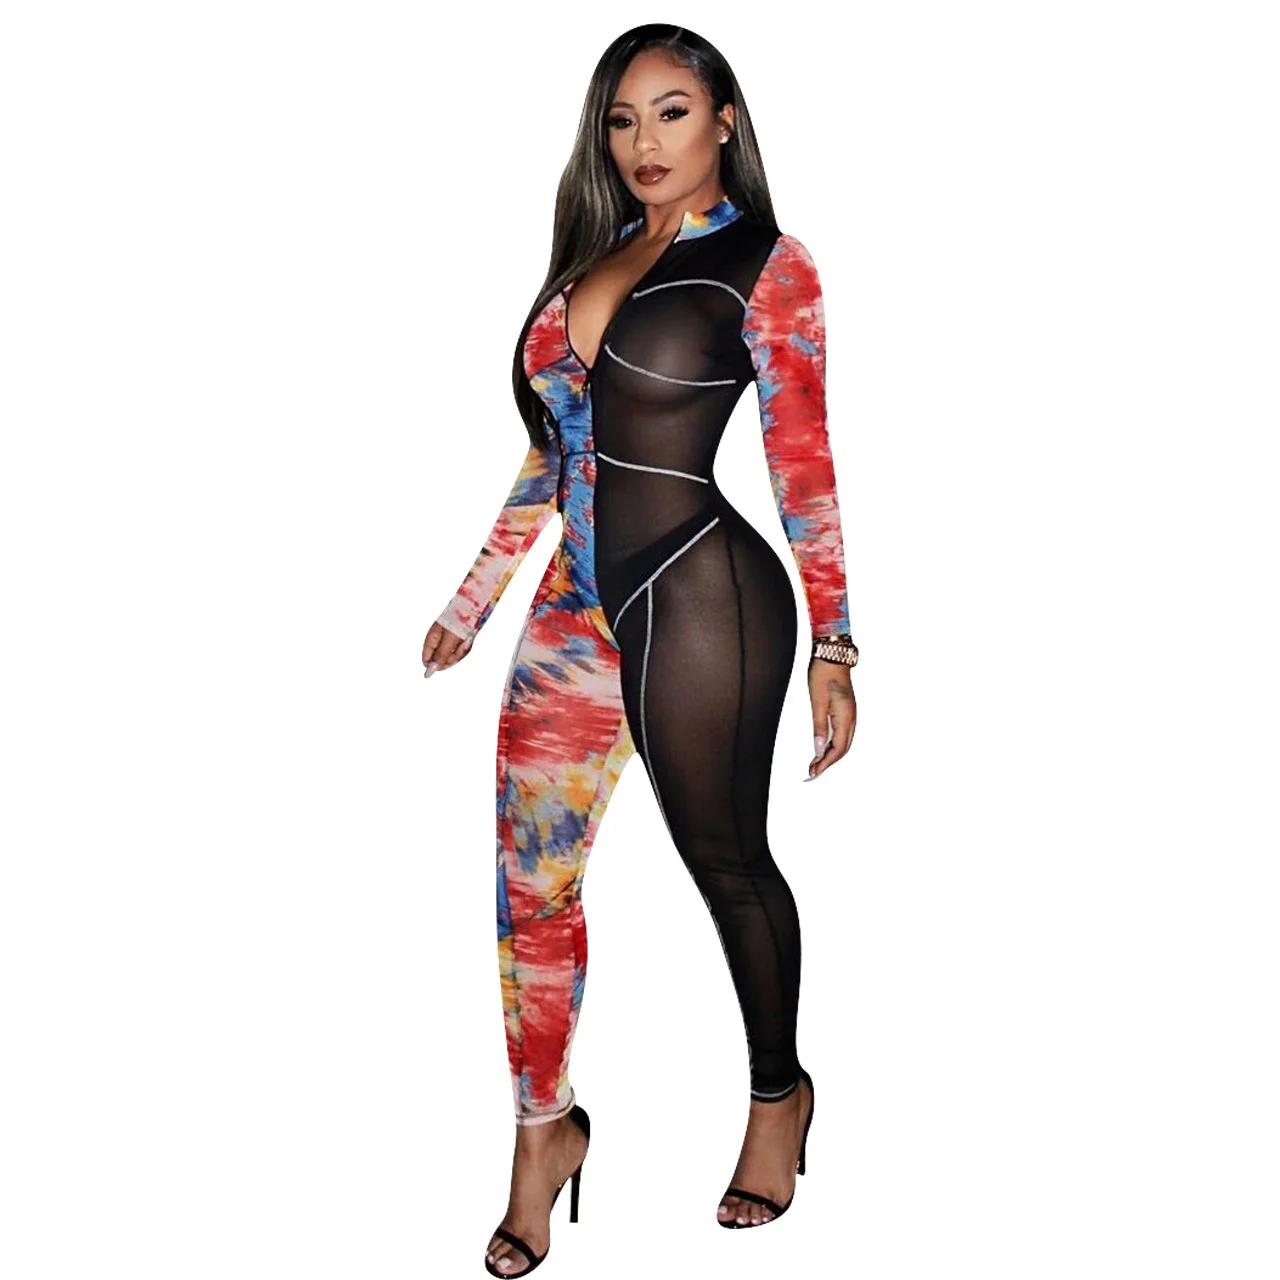 

Zoctuo Elegant Jumpsuit Outfits Women's Clothing Long Sleeve Printed Mesh Webbing Splicing Jumpsuit Bodysuit Overalls